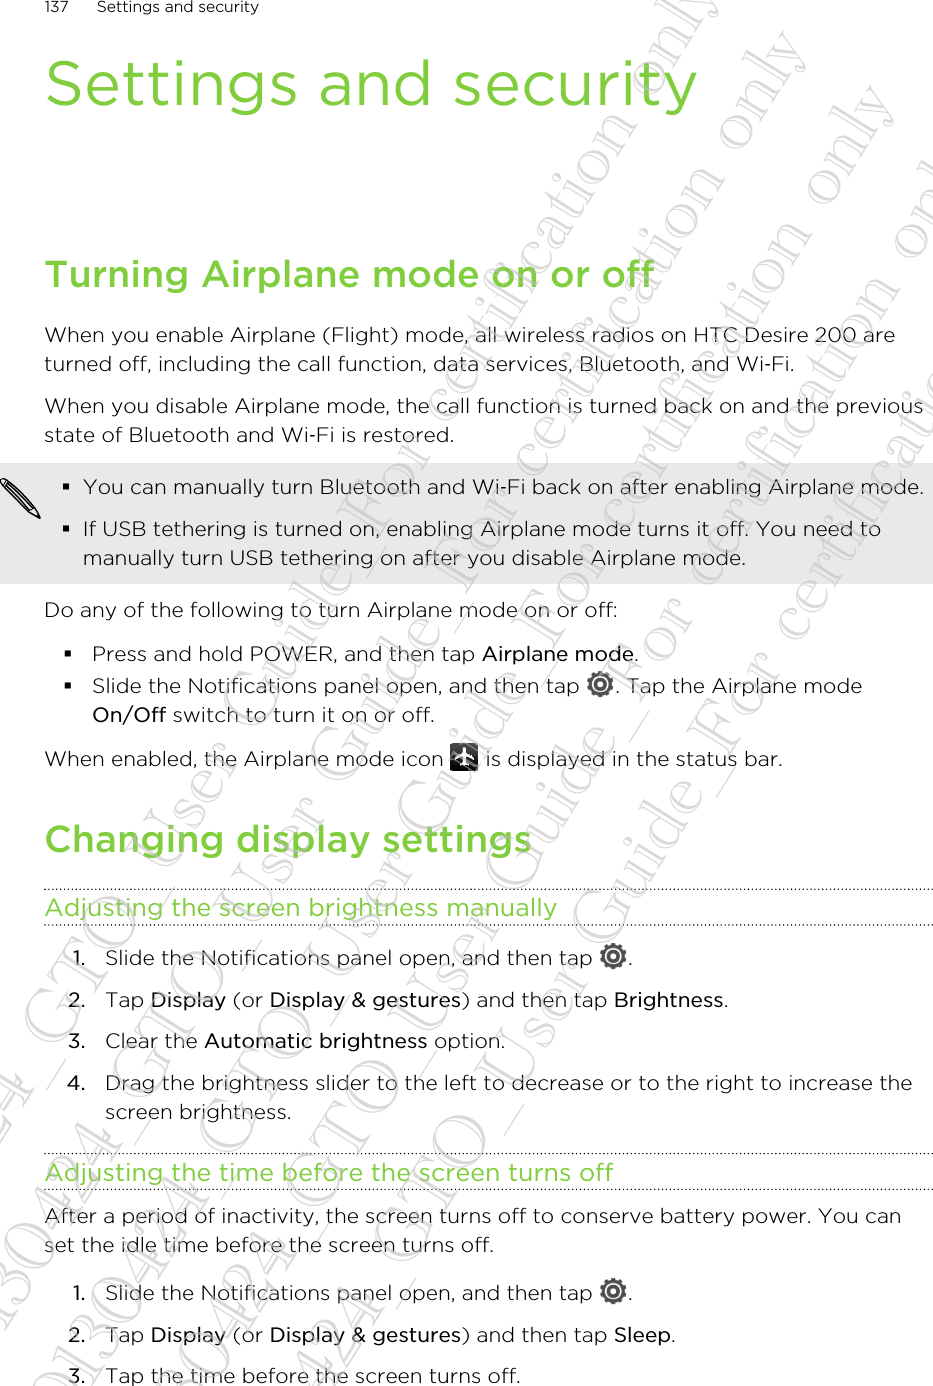 Settings and securityTurning Airplane mode on or offWhen you enable Airplane (Flight) mode, all wireless radios on HTC Desire 200 areturned off, including the call function, data services, Bluetooth, and Wi‑Fi.When you disable Airplane mode, the call function is turned back on and the previousstate of Bluetooth and Wi‑Fi is restored.§You can manually turn Bluetooth and Wi‑Fi back on after enabling Airplane mode.§If USB tethering is turned on, enabling Airplane mode turns it off. You need tomanually turn USB tethering on after you disable Airplane mode.Do any of the following to turn Airplane mode on or off:§Press and hold POWER, and then tap Airplane mode.§Slide the Notifications panel open, and then tap  . Tap the Airplane modeOn/Off switch to turn it on or off.When enabled, the Airplane mode icon   is displayed in the status bar.Changing display settingsAdjusting the screen brightness manually1. Slide the Notifications panel open, and then tap  .2. Tap Display (or Display &amp; gestures) and then tap Brightness.3. Clear the Automatic brightness option.4. Drag the brightness slider to the left to decrease or to the right to increase thescreen brightness.Adjusting the time before the screen turns offAfter a period of inactivity, the screen turns off to conserve battery power. You canset the idle time before the screen turns off.1. Slide the Notifications panel open, and then tap  .2. Tap Display (or Display &amp; gestures) and then tap Sleep.3. Tap the time before the screen turns off.137 Settings and security20130424_GTO_User Guide_For certification only 20130424_GTO_User Guide_For certification only 20130424_GTO_User Guide_For certification only 20130424_GTO_User Guide_For certification only 20130424_GTO_User Guide_For certification only